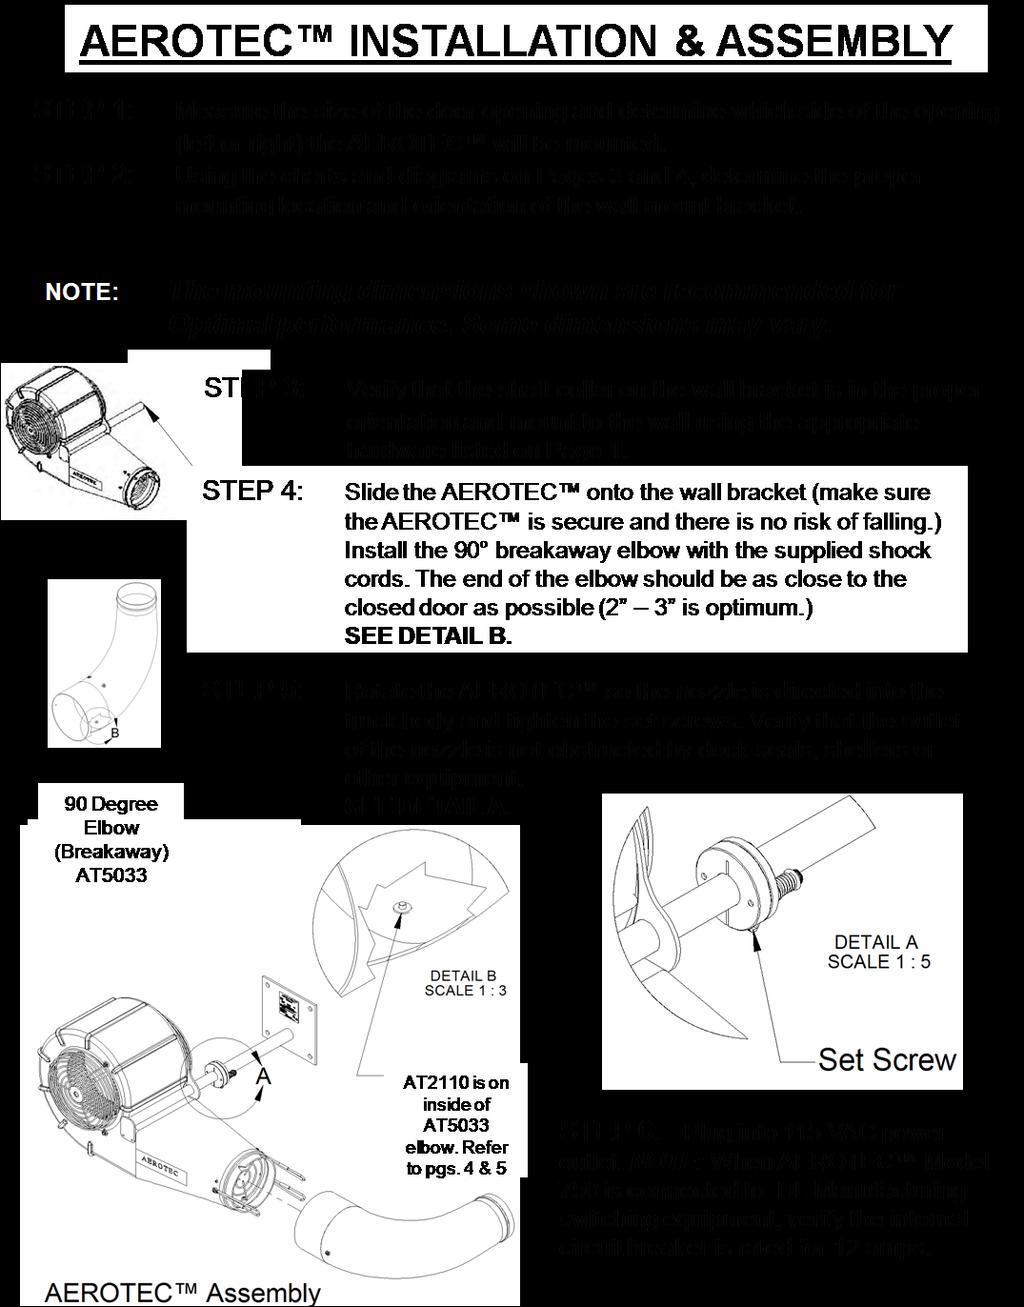 Page 2 Slide the AEROTEC onto the wall bracket (verify that the tube penetrates the wall mount by 3 or more and there is no risk of